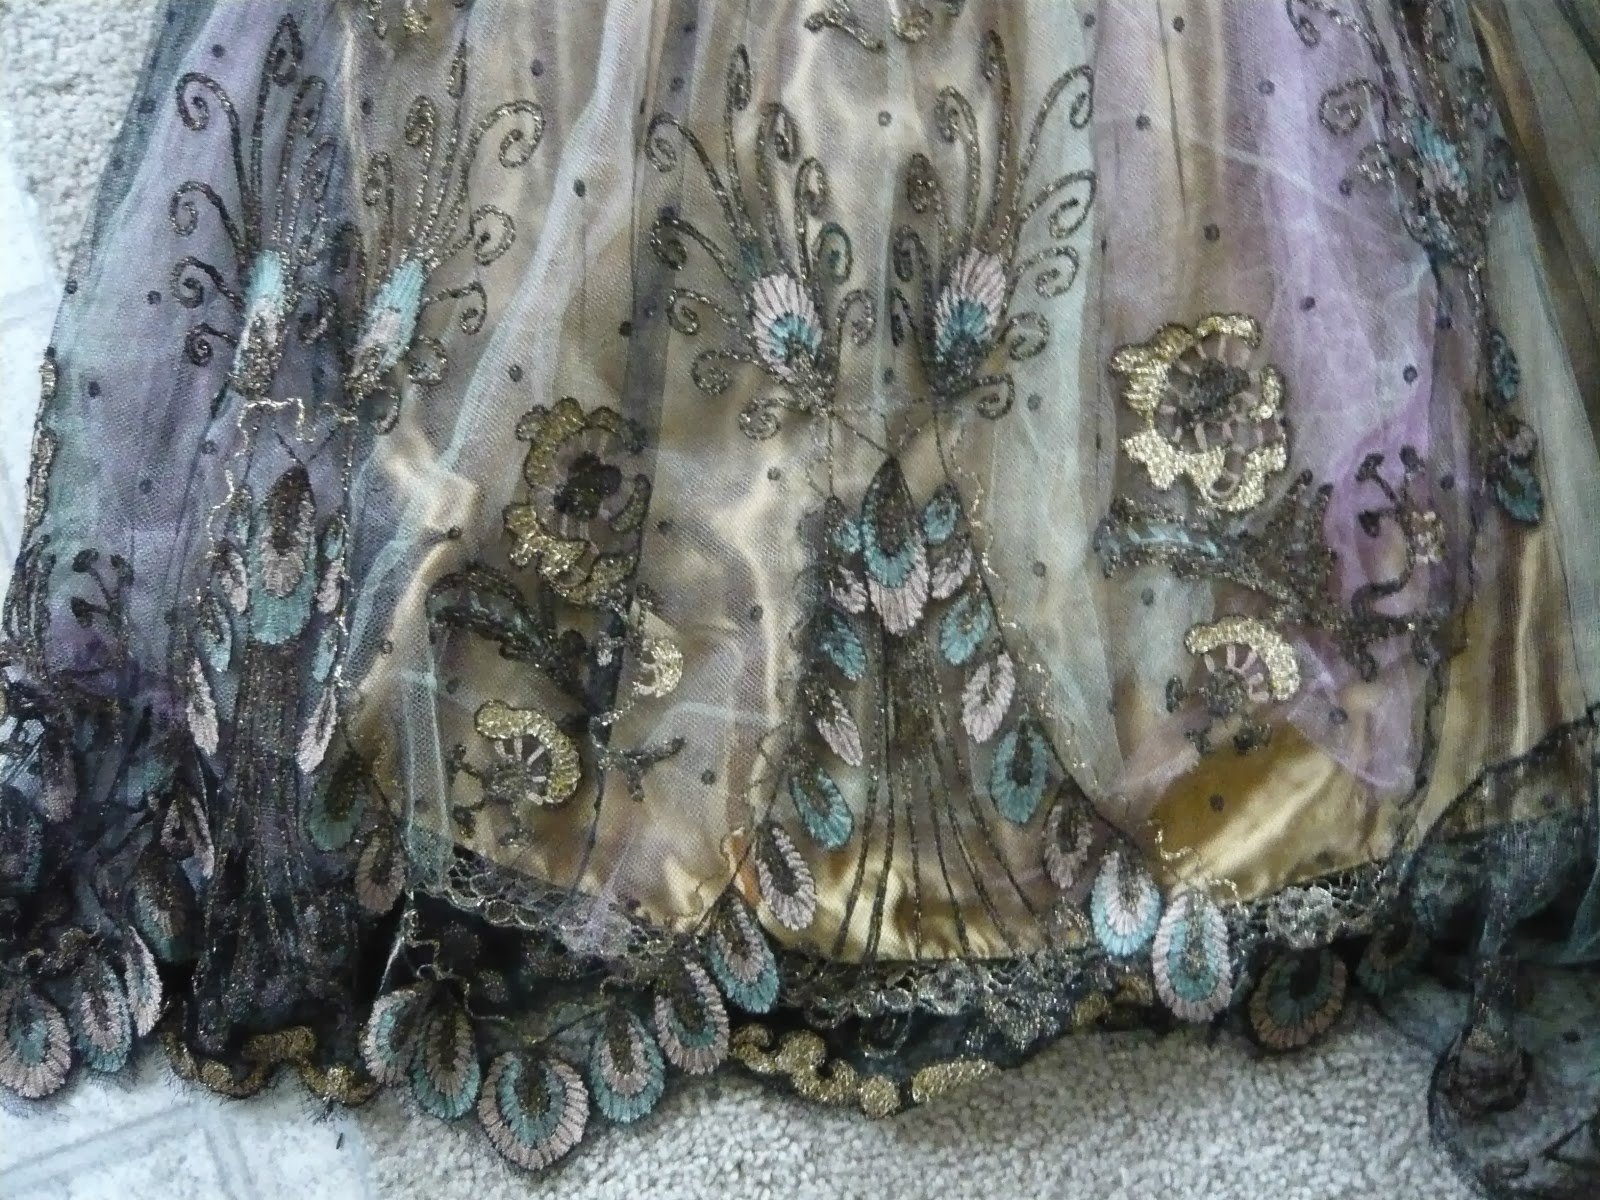 All The Pretty Dresses: I know it looks crazy, but I love this 1920's dress